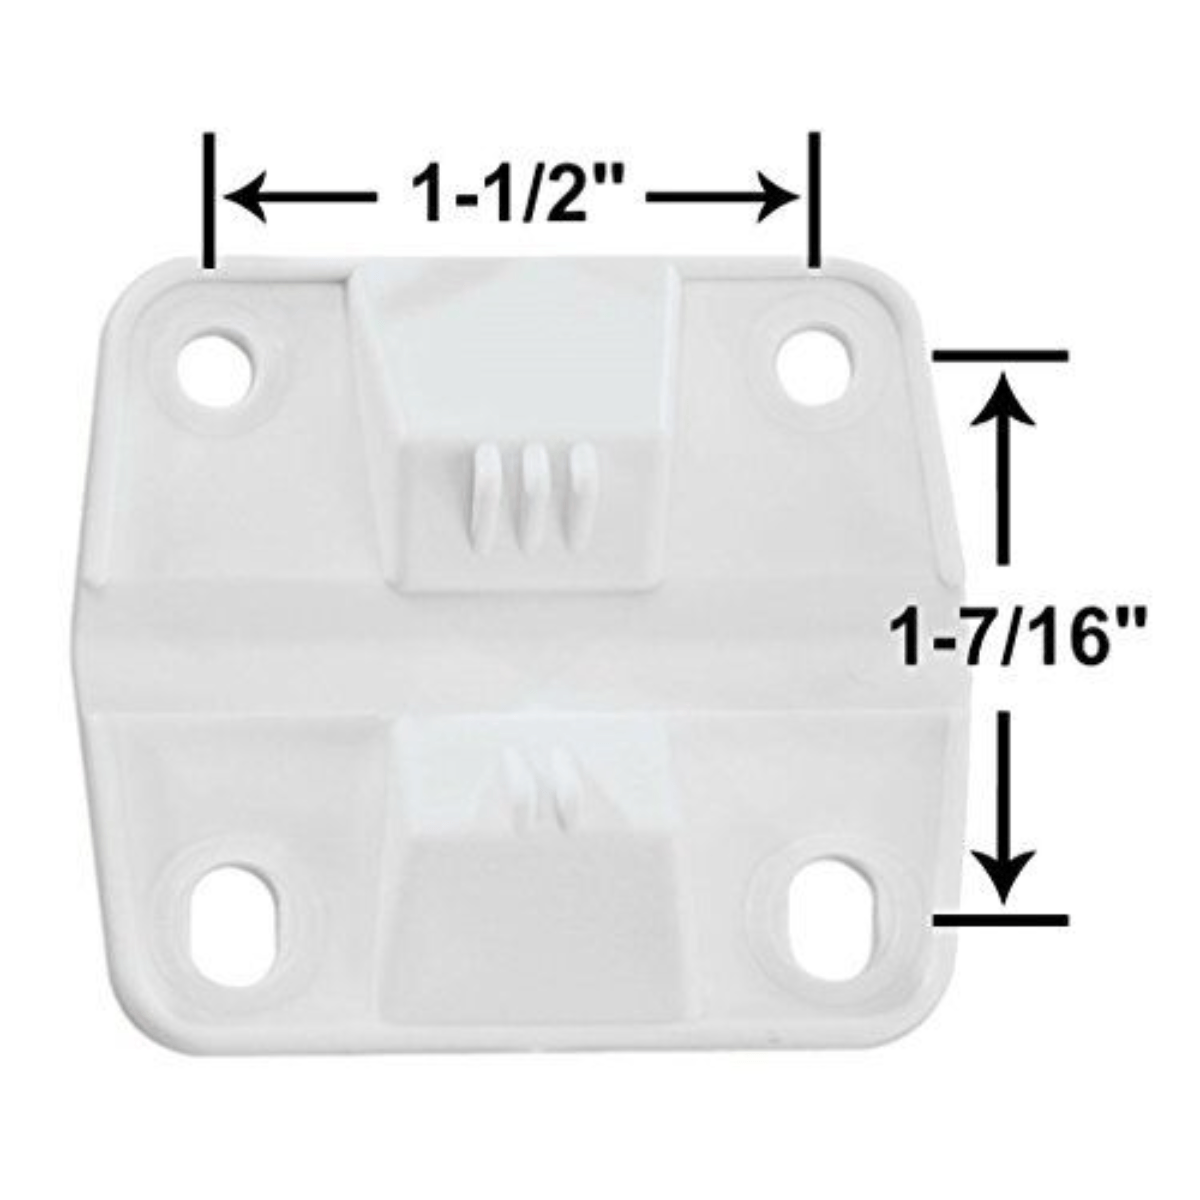 Coleman Cooler Replacement Hinge  2    Multi Color ?v=638230439744300000